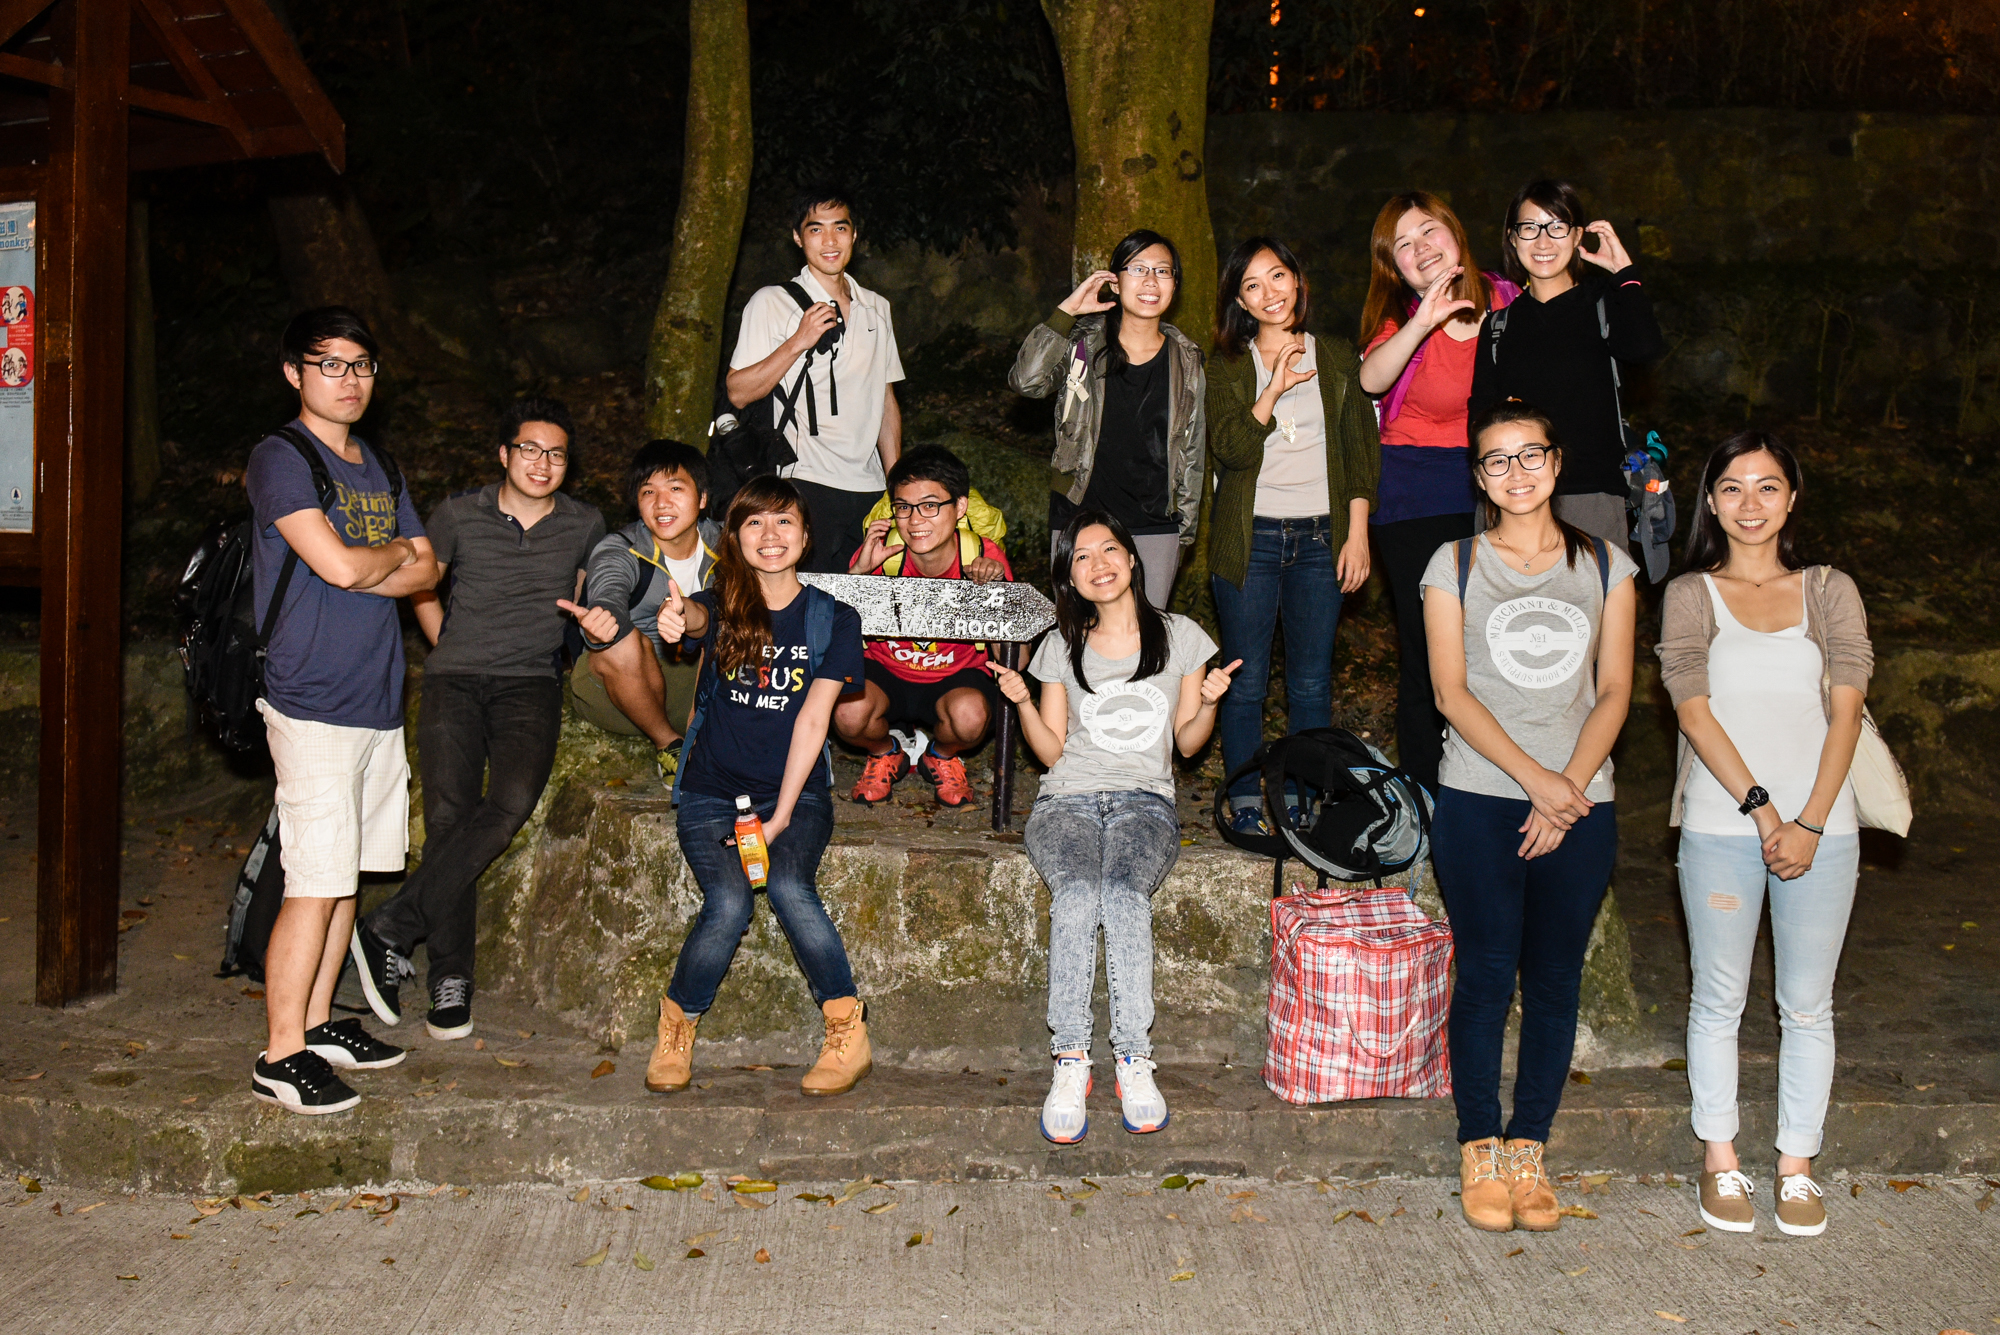 a group of people posing for a picture at night